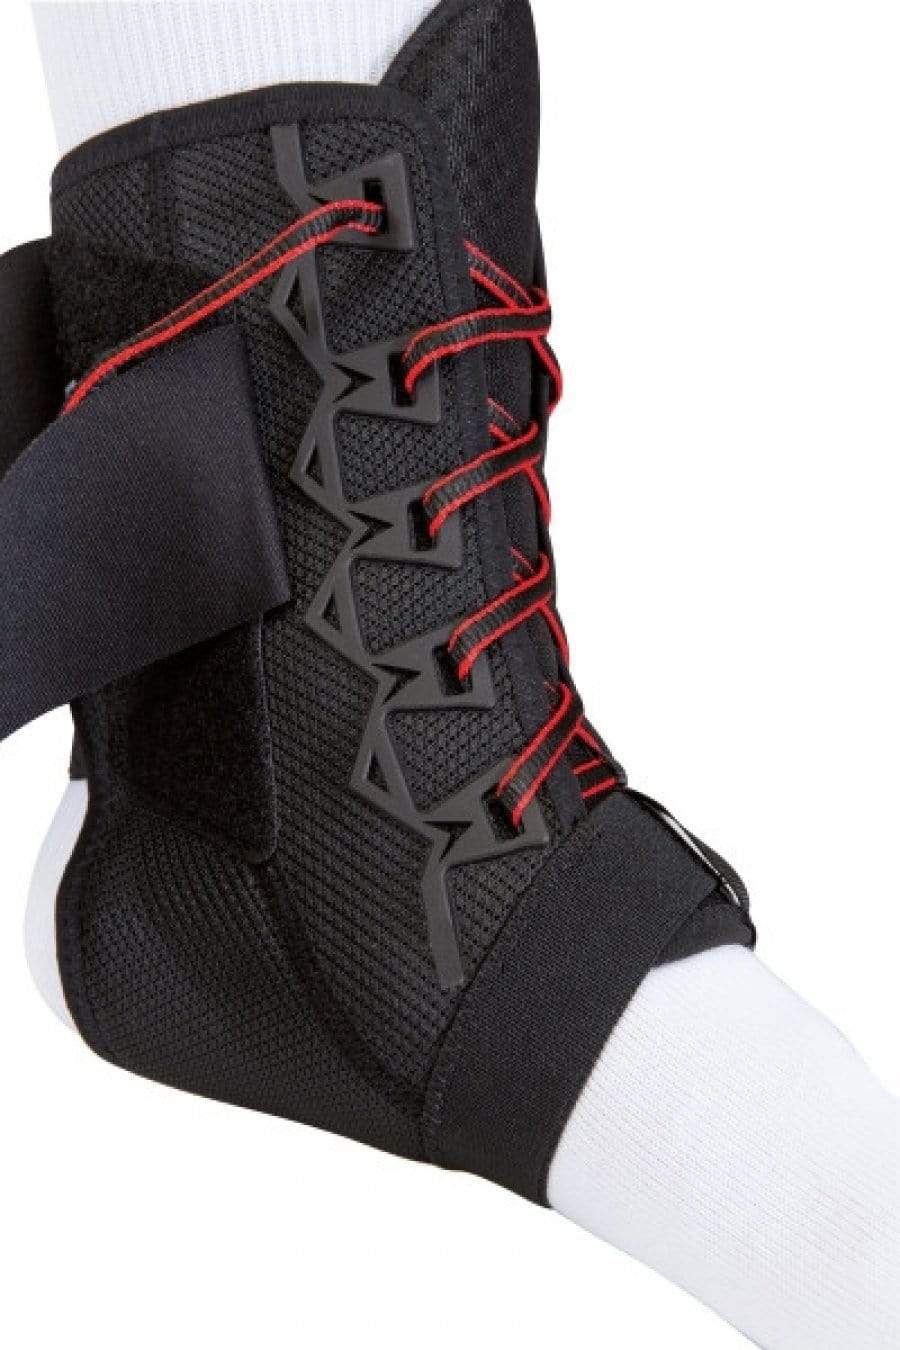 MUE488 THE ONE PREMIUM ANKLE BRACE LACE UP WITH FIGURE 8 STRAPPING